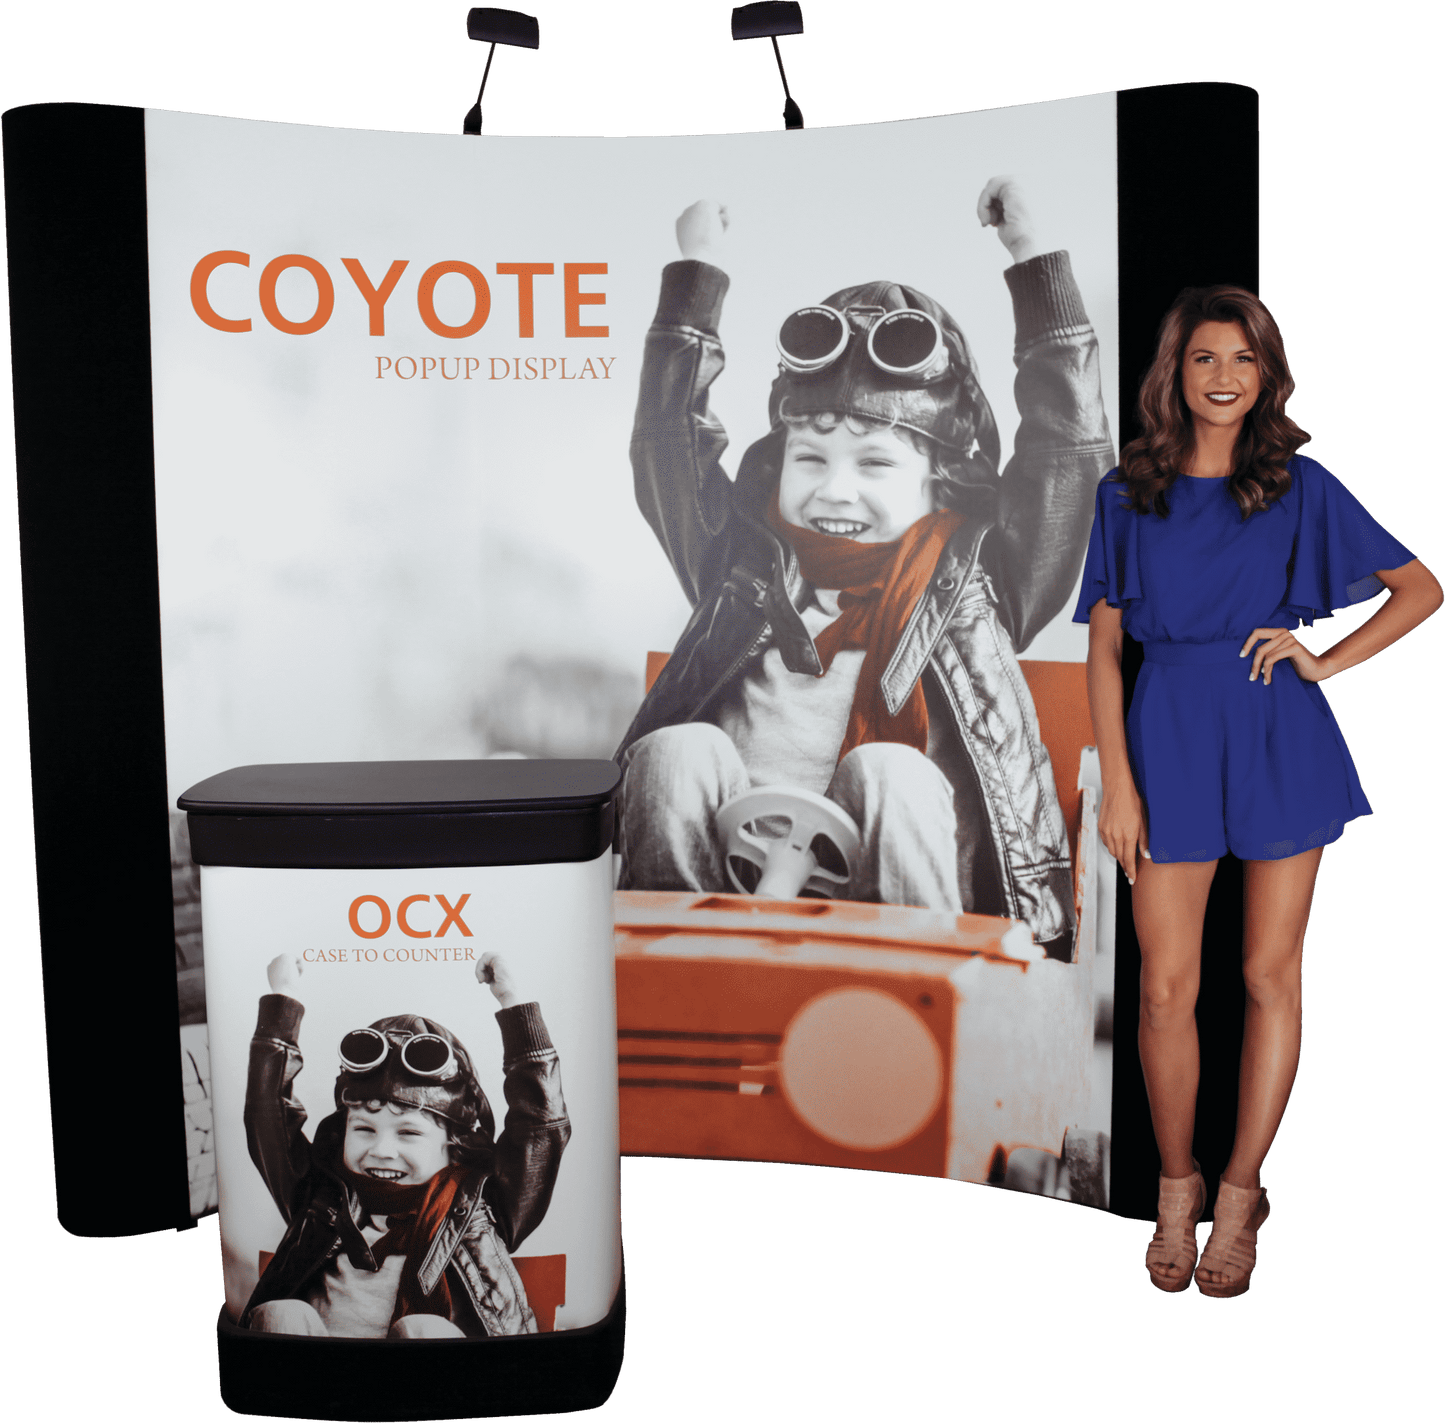 8ft x 8ft Coyote Straight Full Graphic Mural Display (Graphic Package) 3x3 Fast Kit